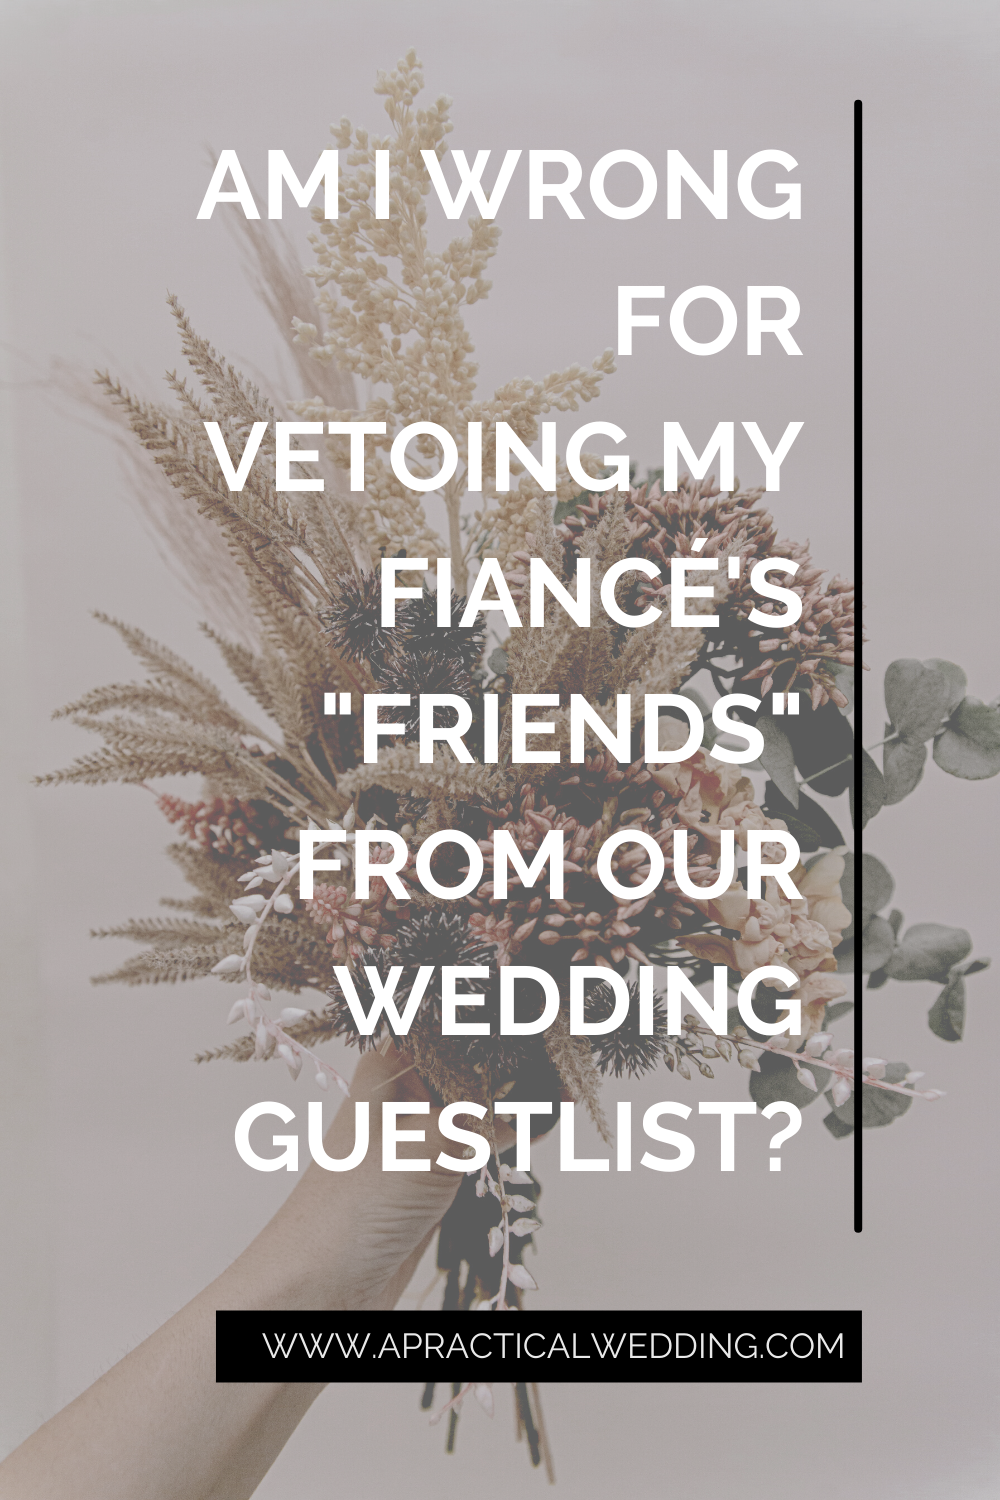 Is It Wrong To Veto My Fiancé’s High School Friends From Our Guest List?